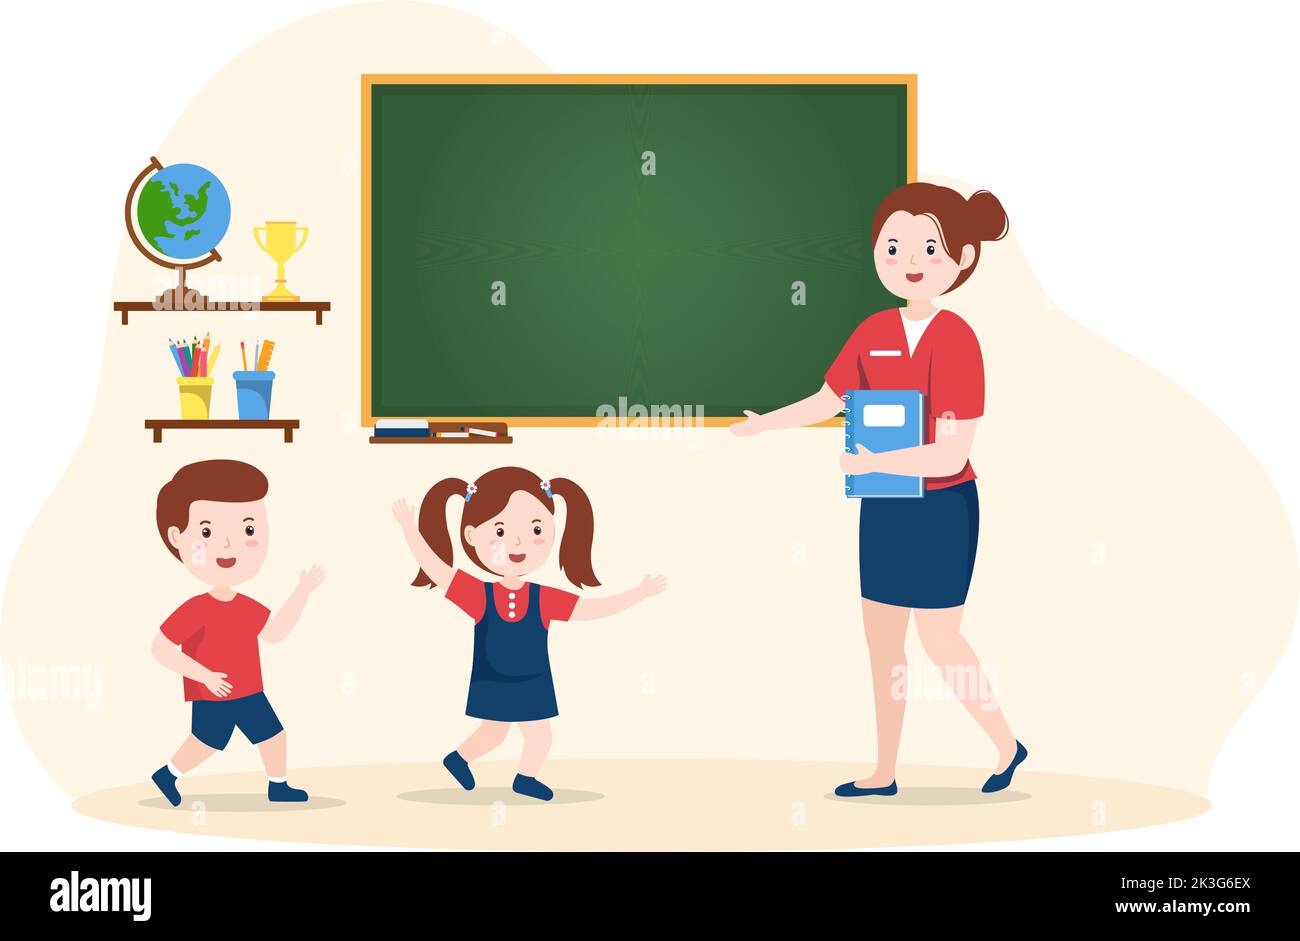 Primary School with Cute Little Students Studying in the Classroom in Hand Drawn Flat Cartoon Illustration Template Stock Vector